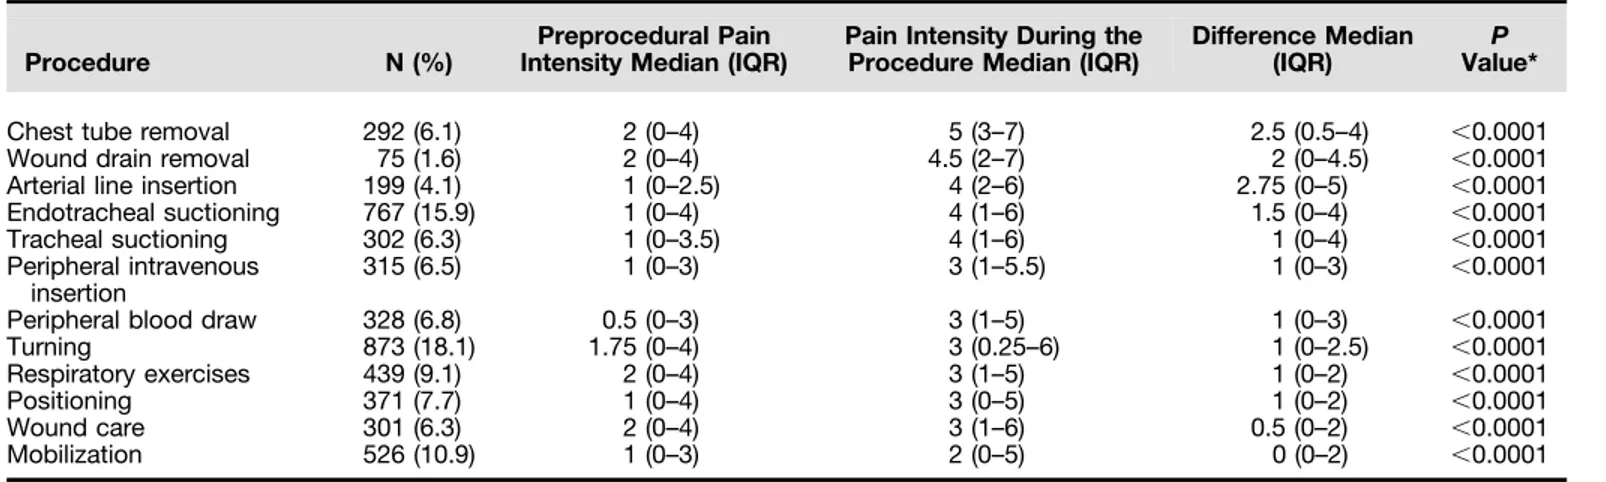 Table 2: Differences in Pain Intensity from before the Procedure to during the Procedure